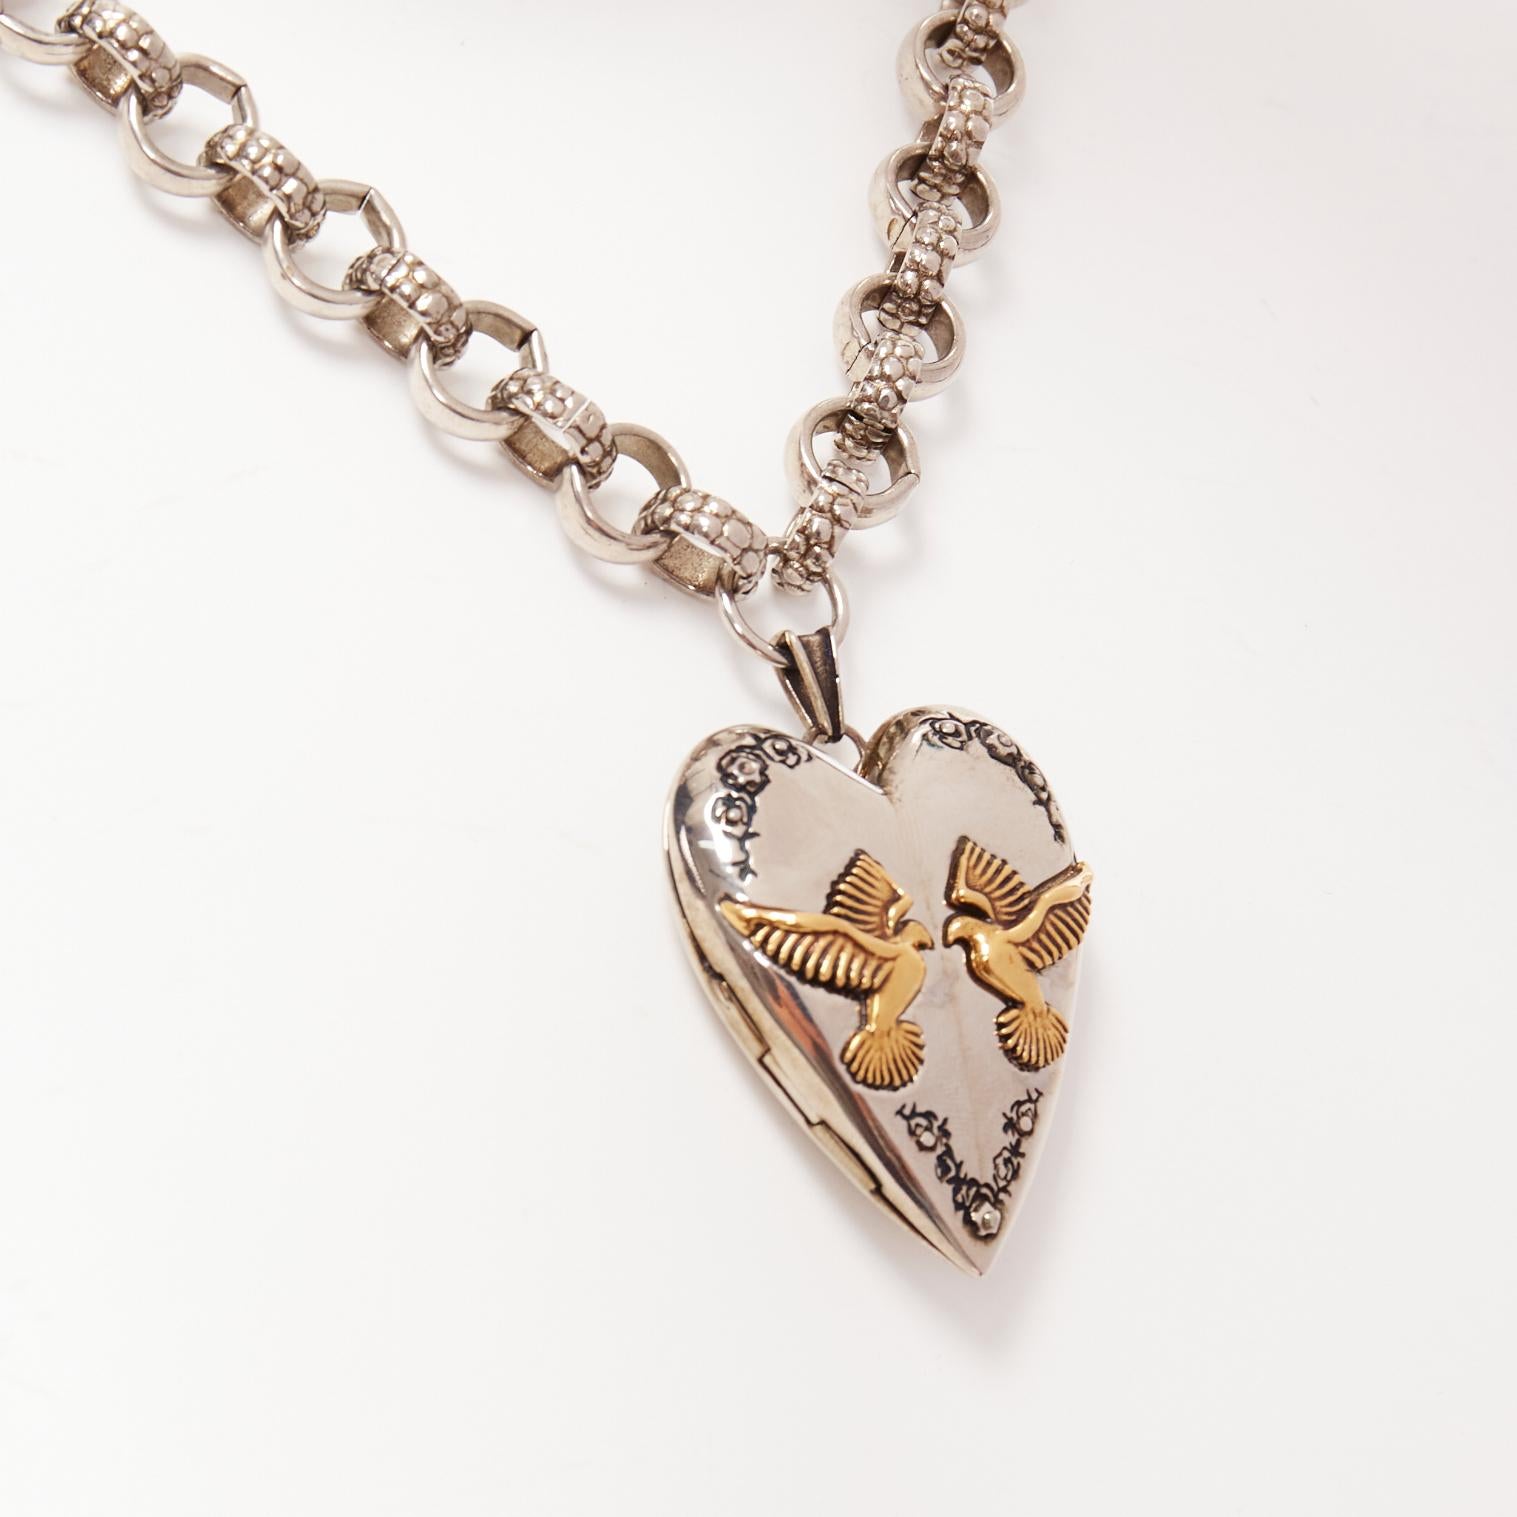 ALEXANDER MCQUEEN silver gold birds heart locket textured chain necklace
Reference: TGAS/D01108
Brand: Alexander McQueen
Material: Metal
Color: Silver, Gold
Pattern: Solid
Closure: Lobster Clasp
Lining: Silver Metal
Extra Details: Logo charm at